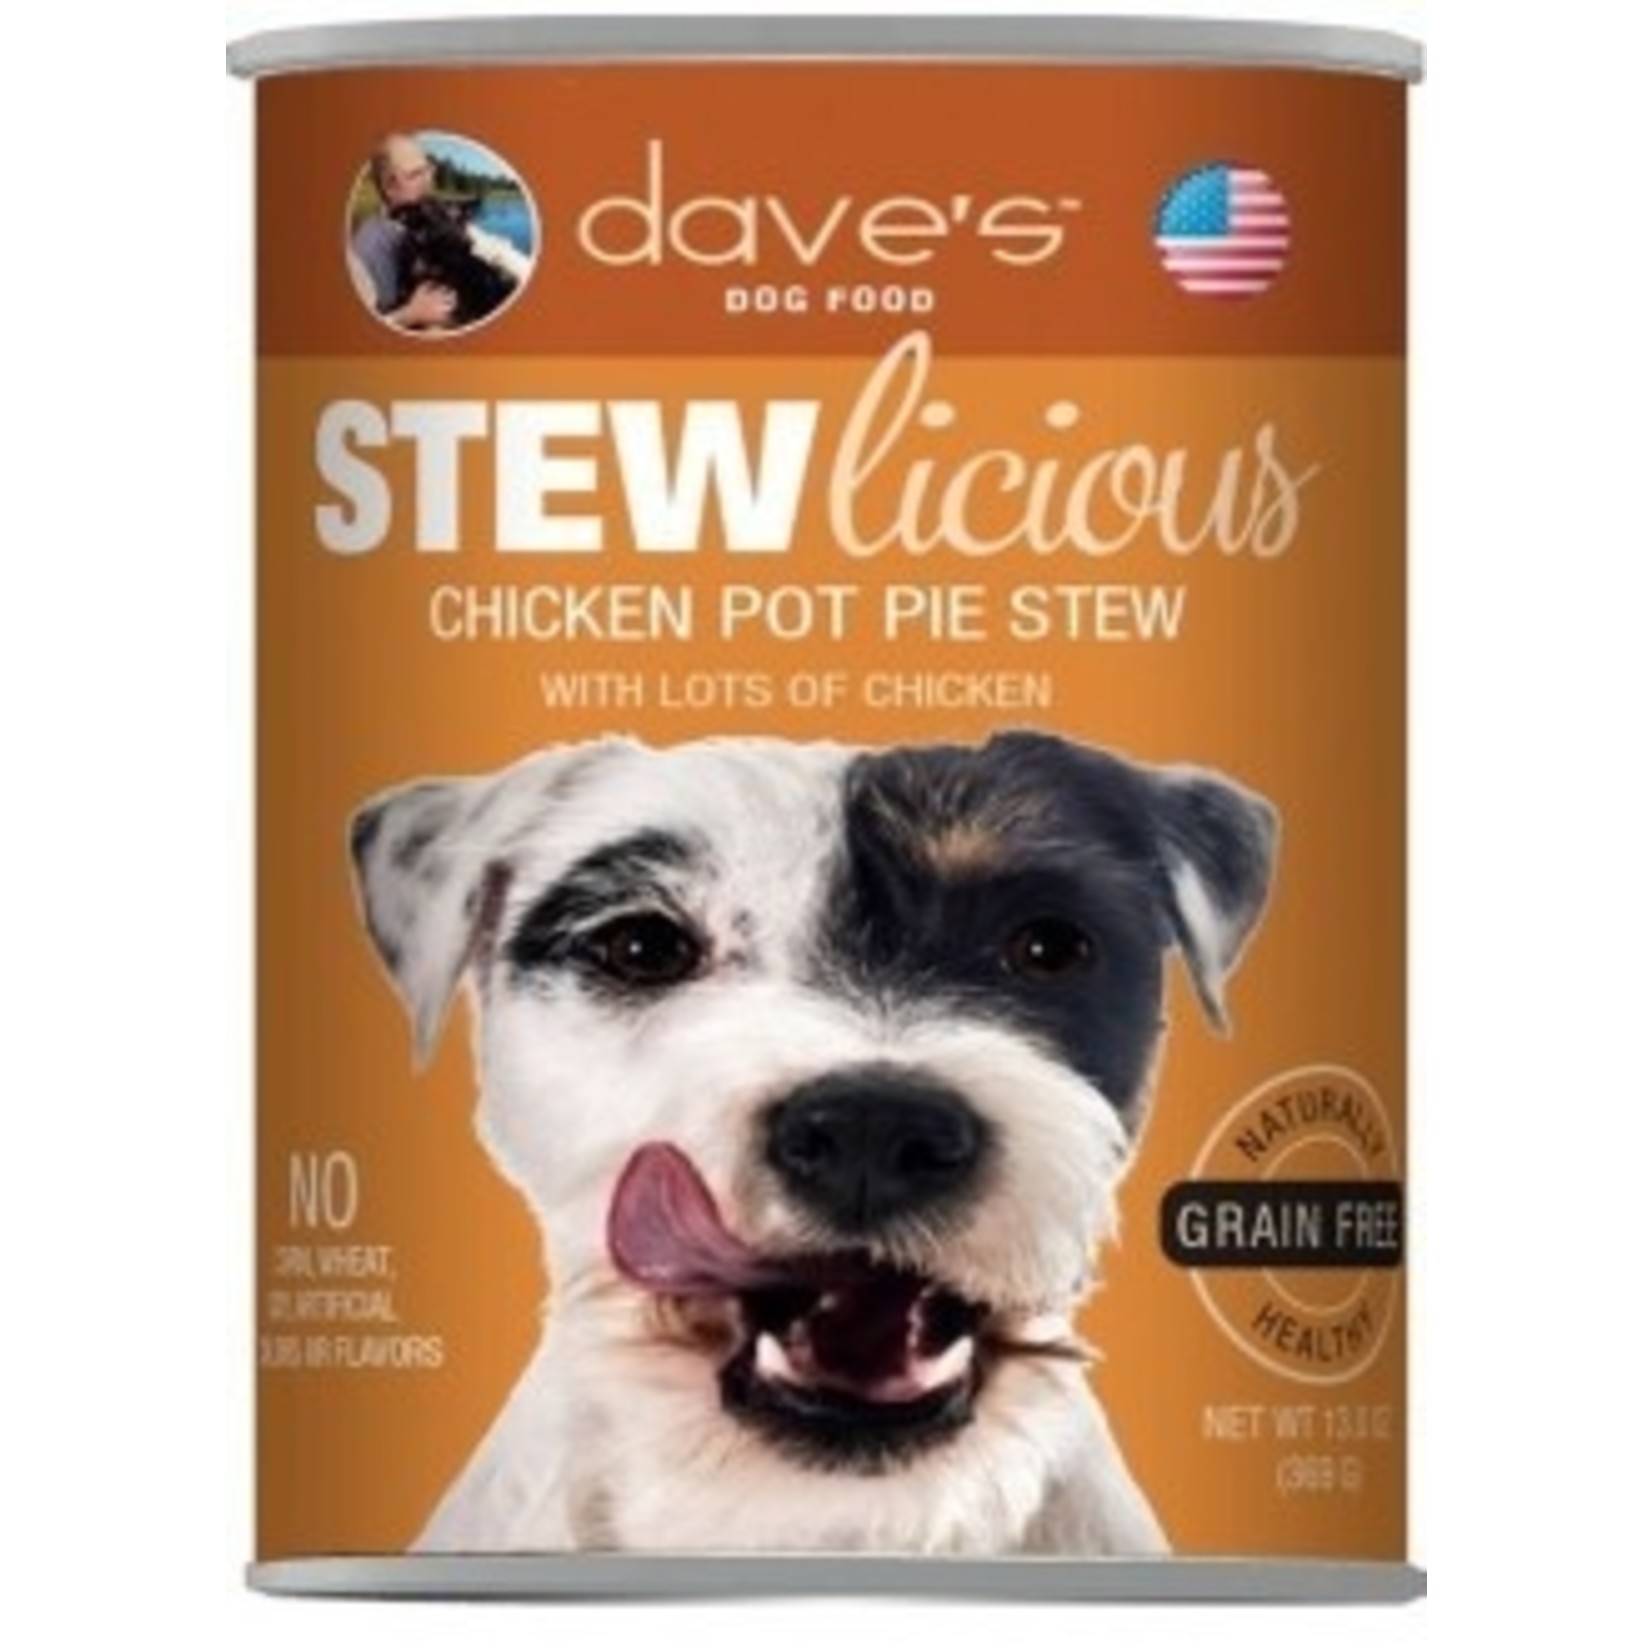 Dave's Pet Food Dave's Stewlicious Chicken Pot Pie Stew Canned Dog Food 13oz